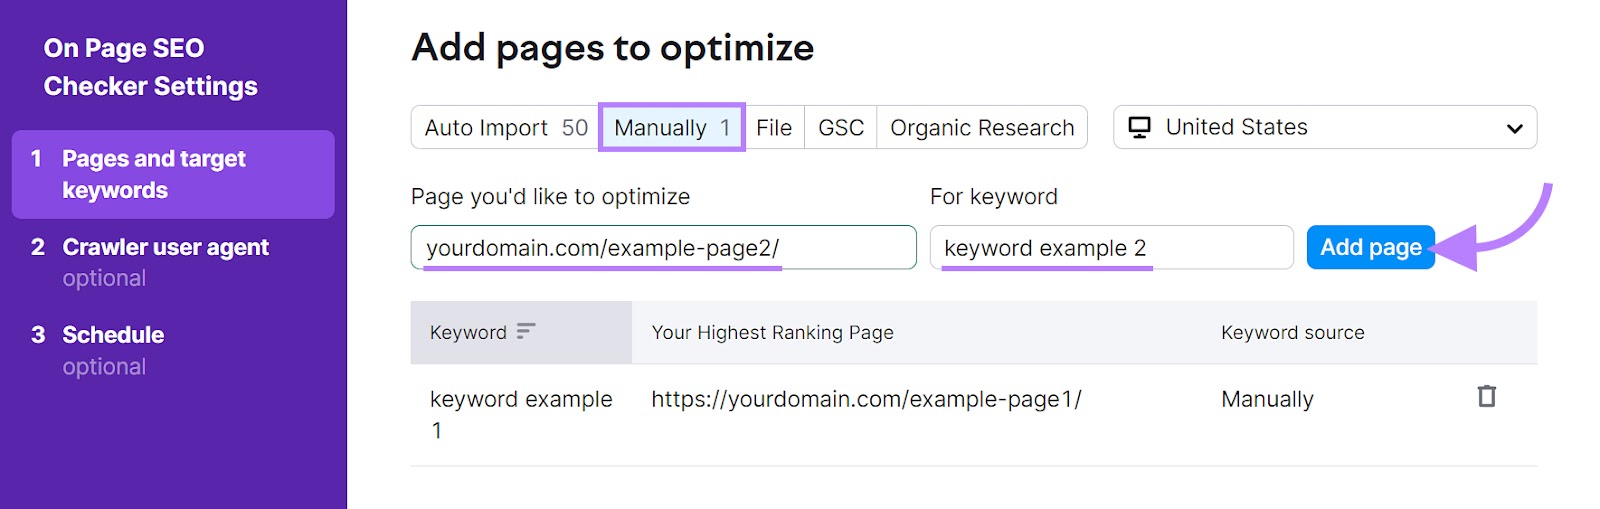 On Page SEO Checker "Pages and target keywords" tab with the "Manually" tab and the "Add page" button highlighted.